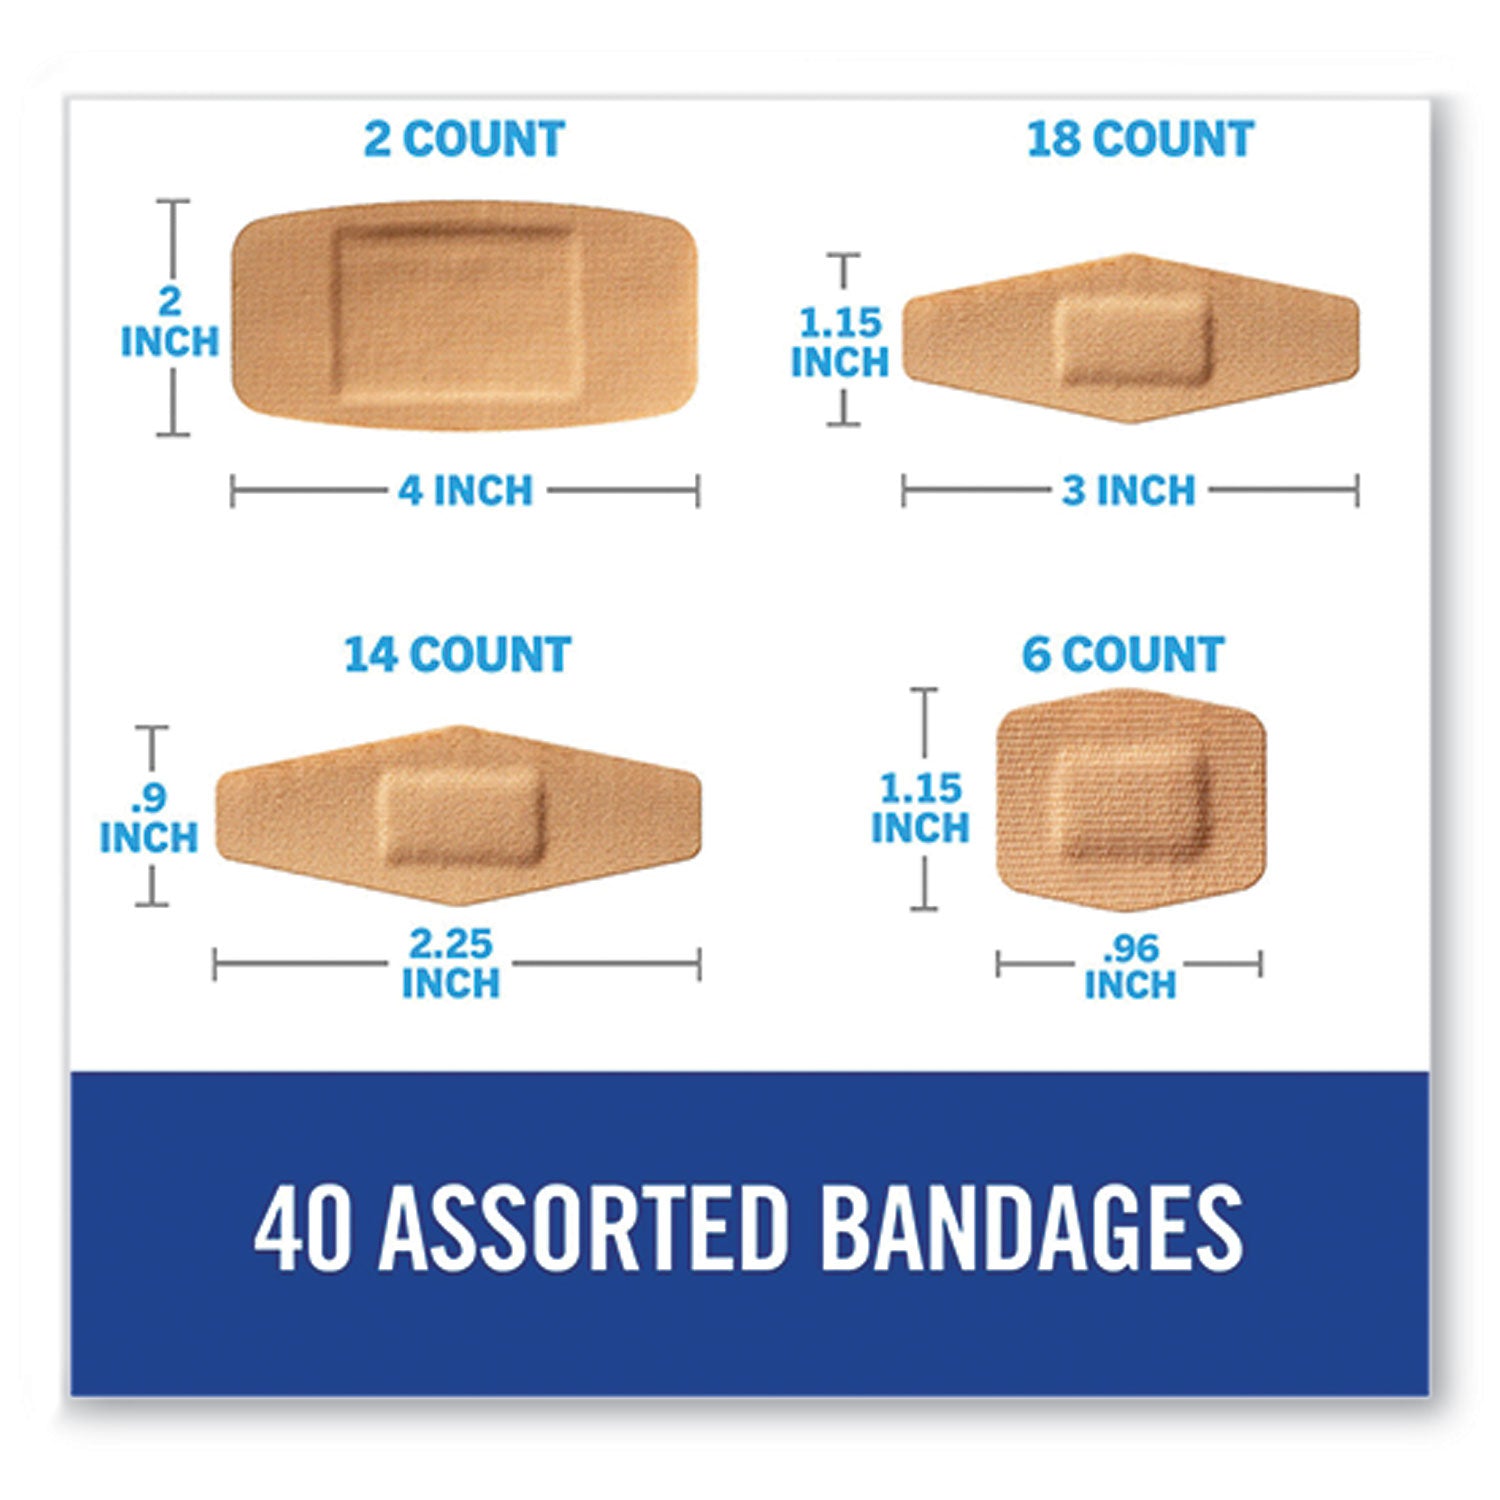 duo-bandages-plastic-assorted-sizes-40-pack_mmmdsa40 - 3